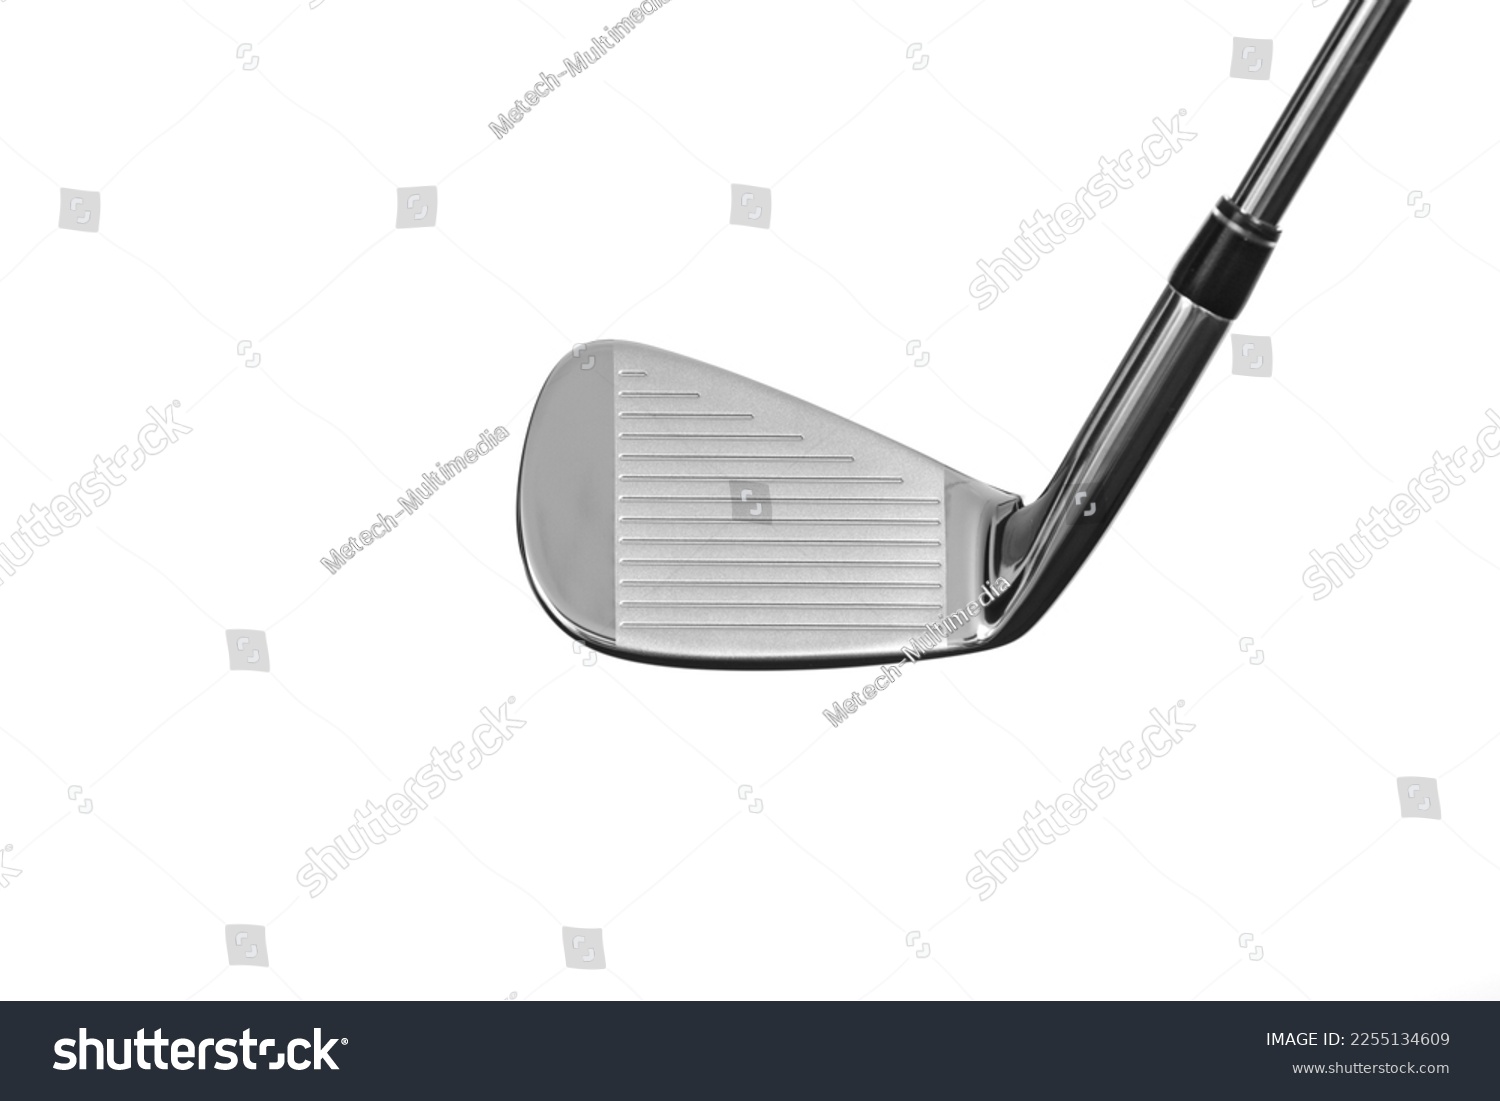 Golf Club Head isolated on a white background, showing club face side-on. #2255134609